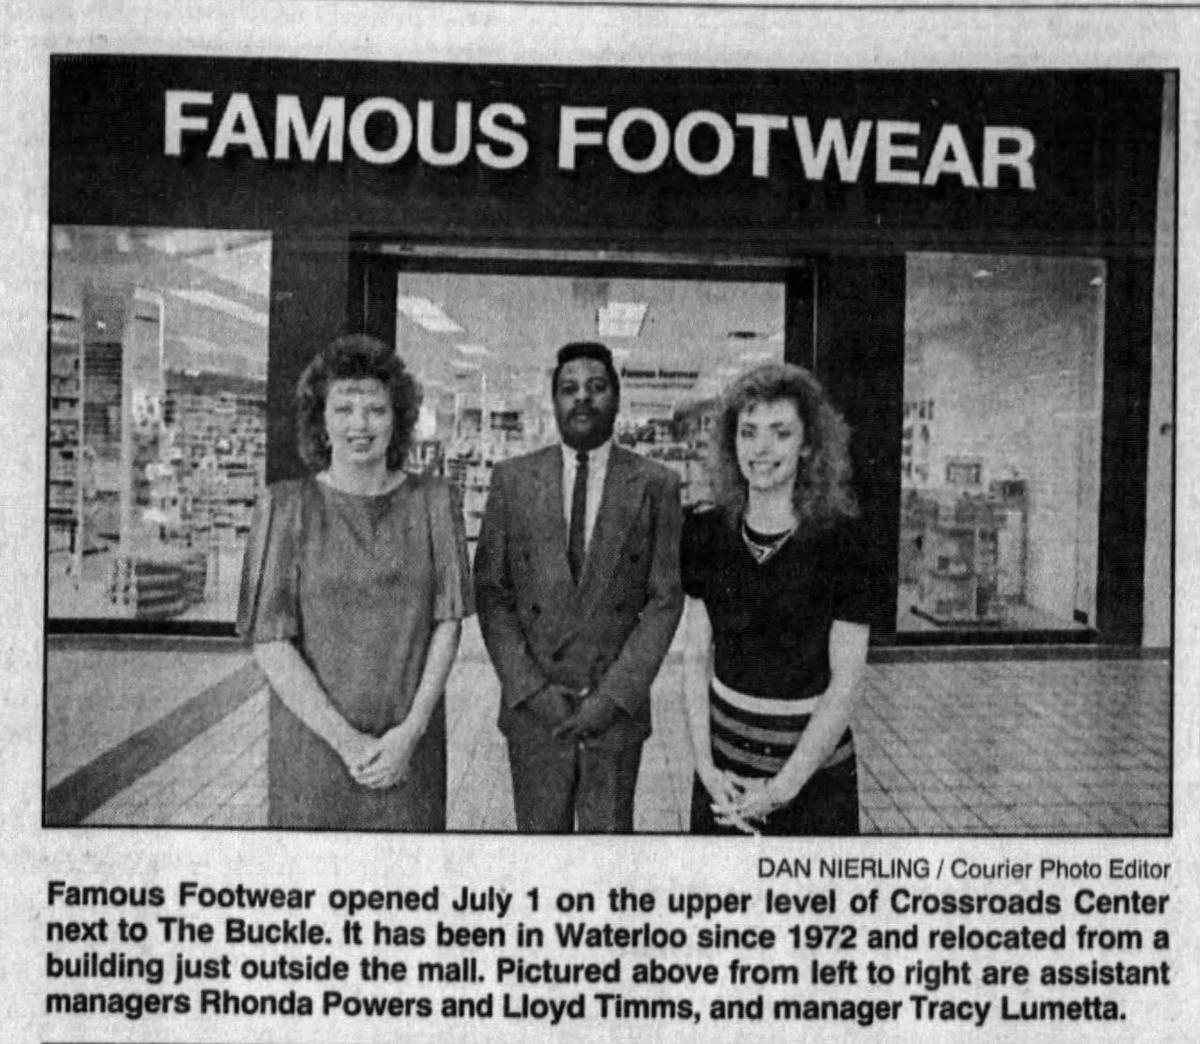 1994 photo of Famous Footwear reopening in Crossroads Center